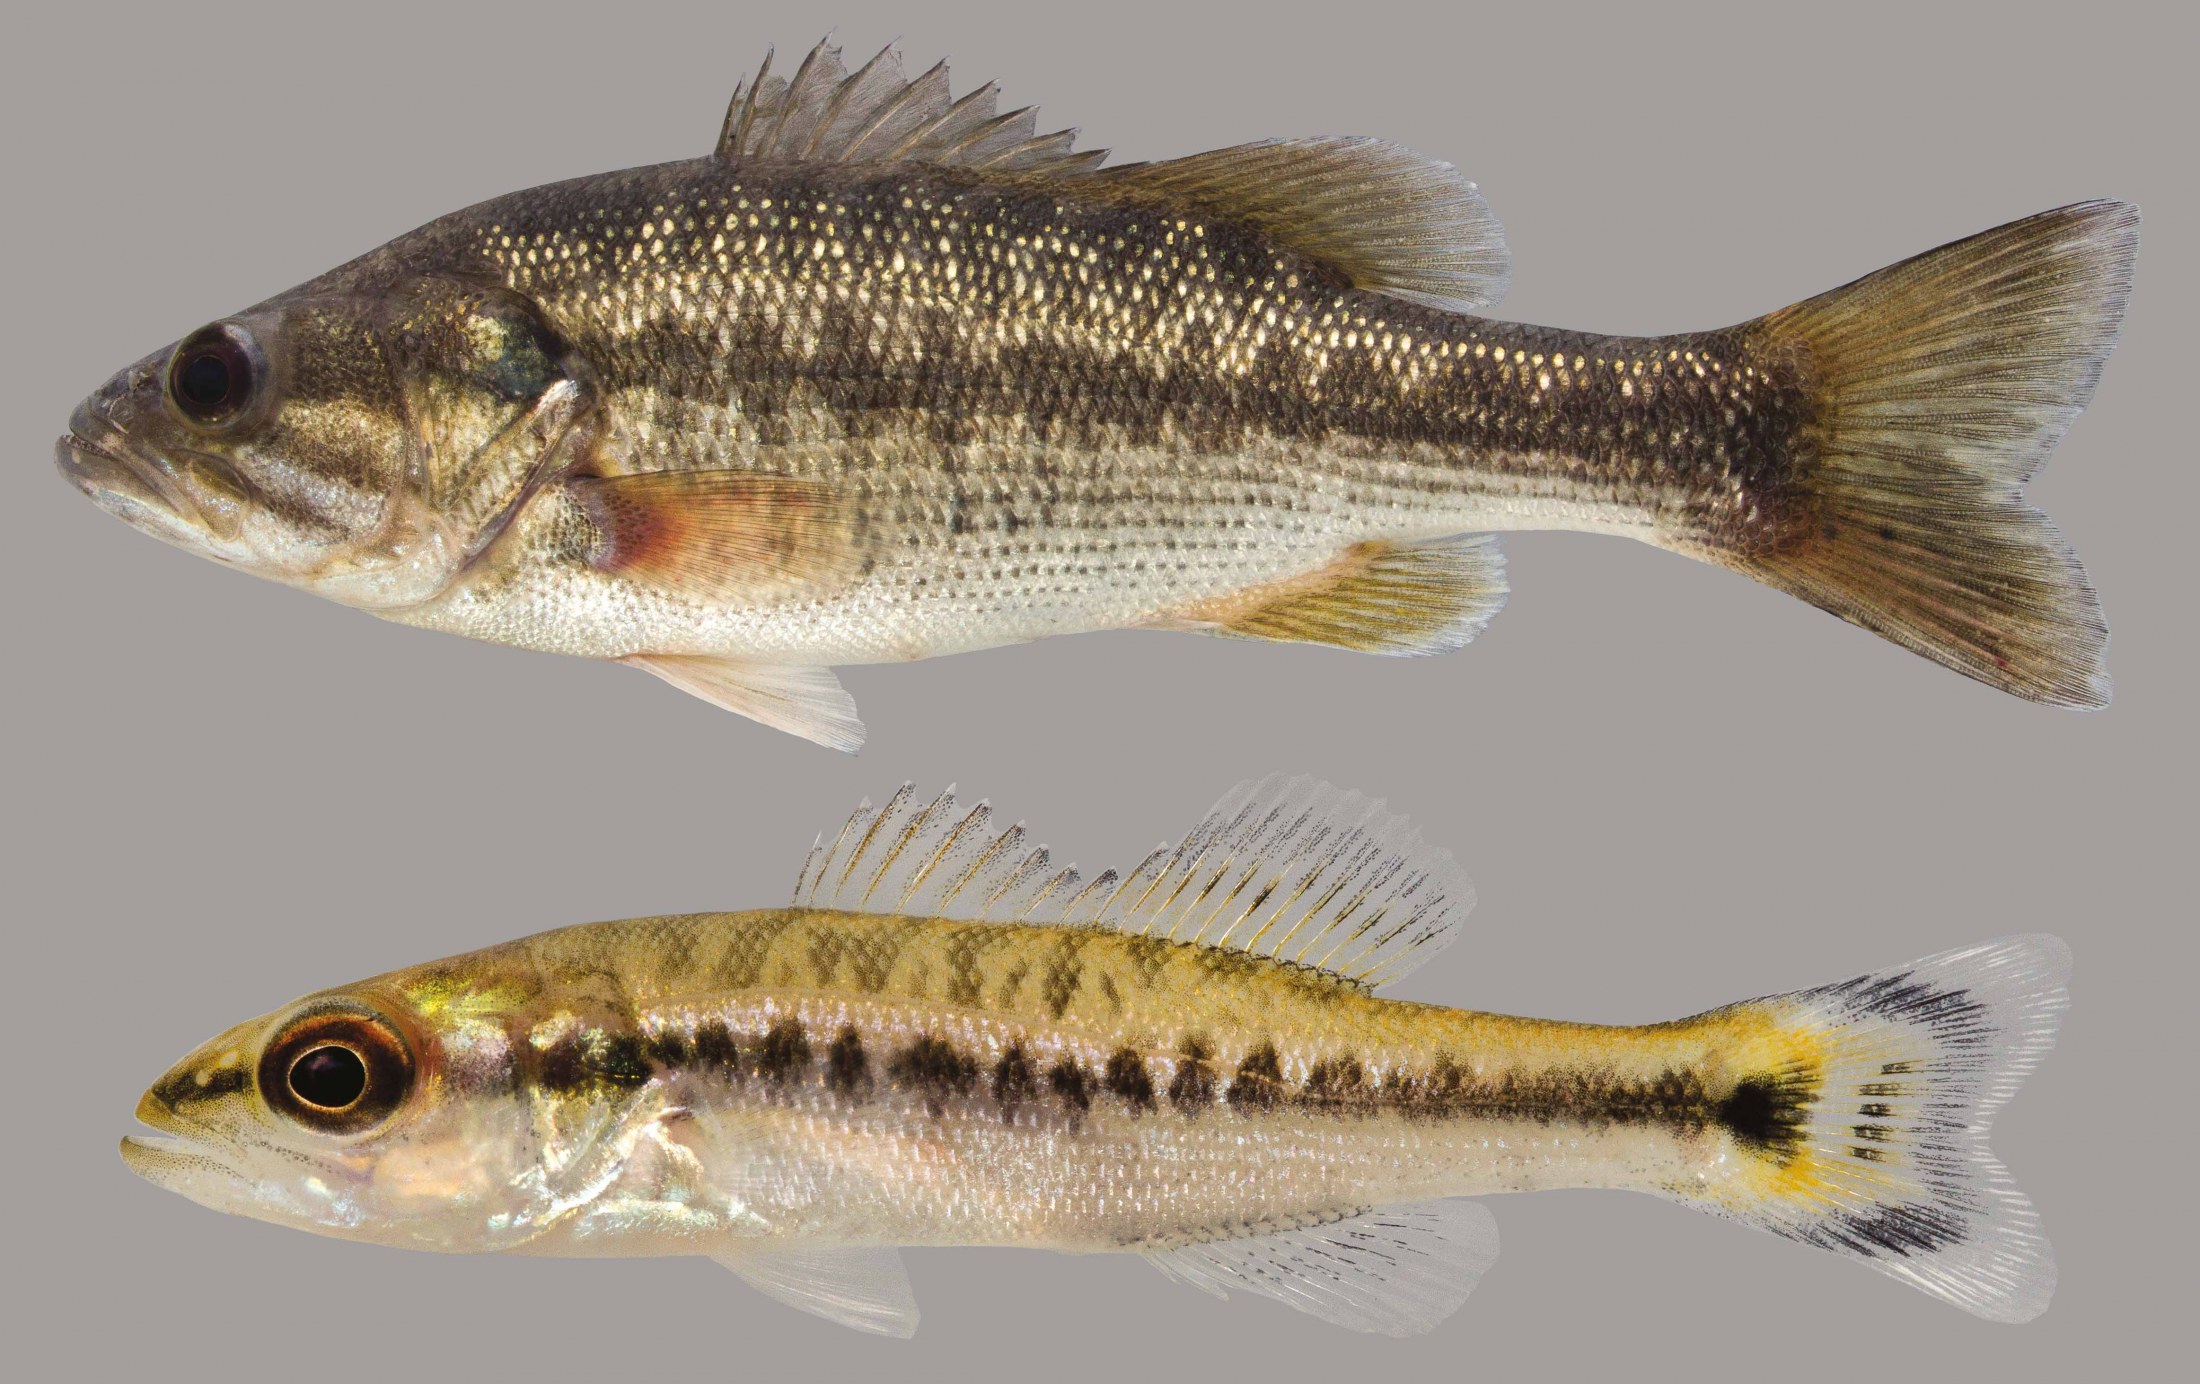 Lateral view of spotted bass